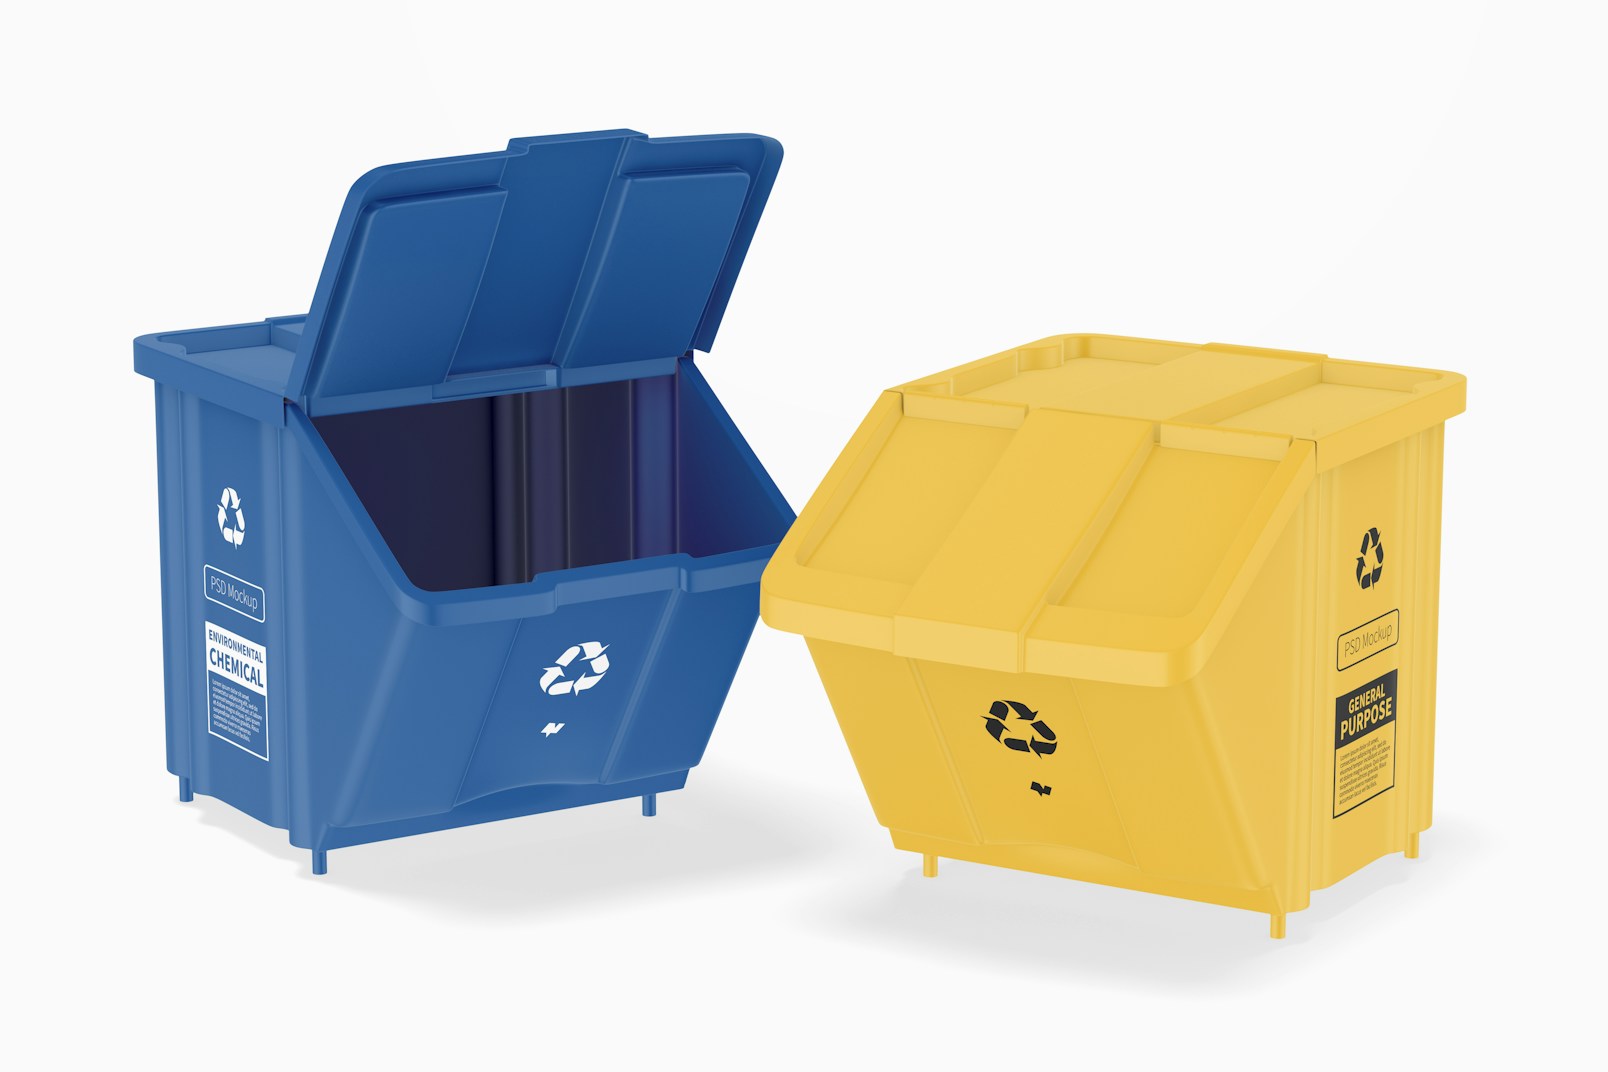 Bin Kit with Lid Mockup, Opened and Closed